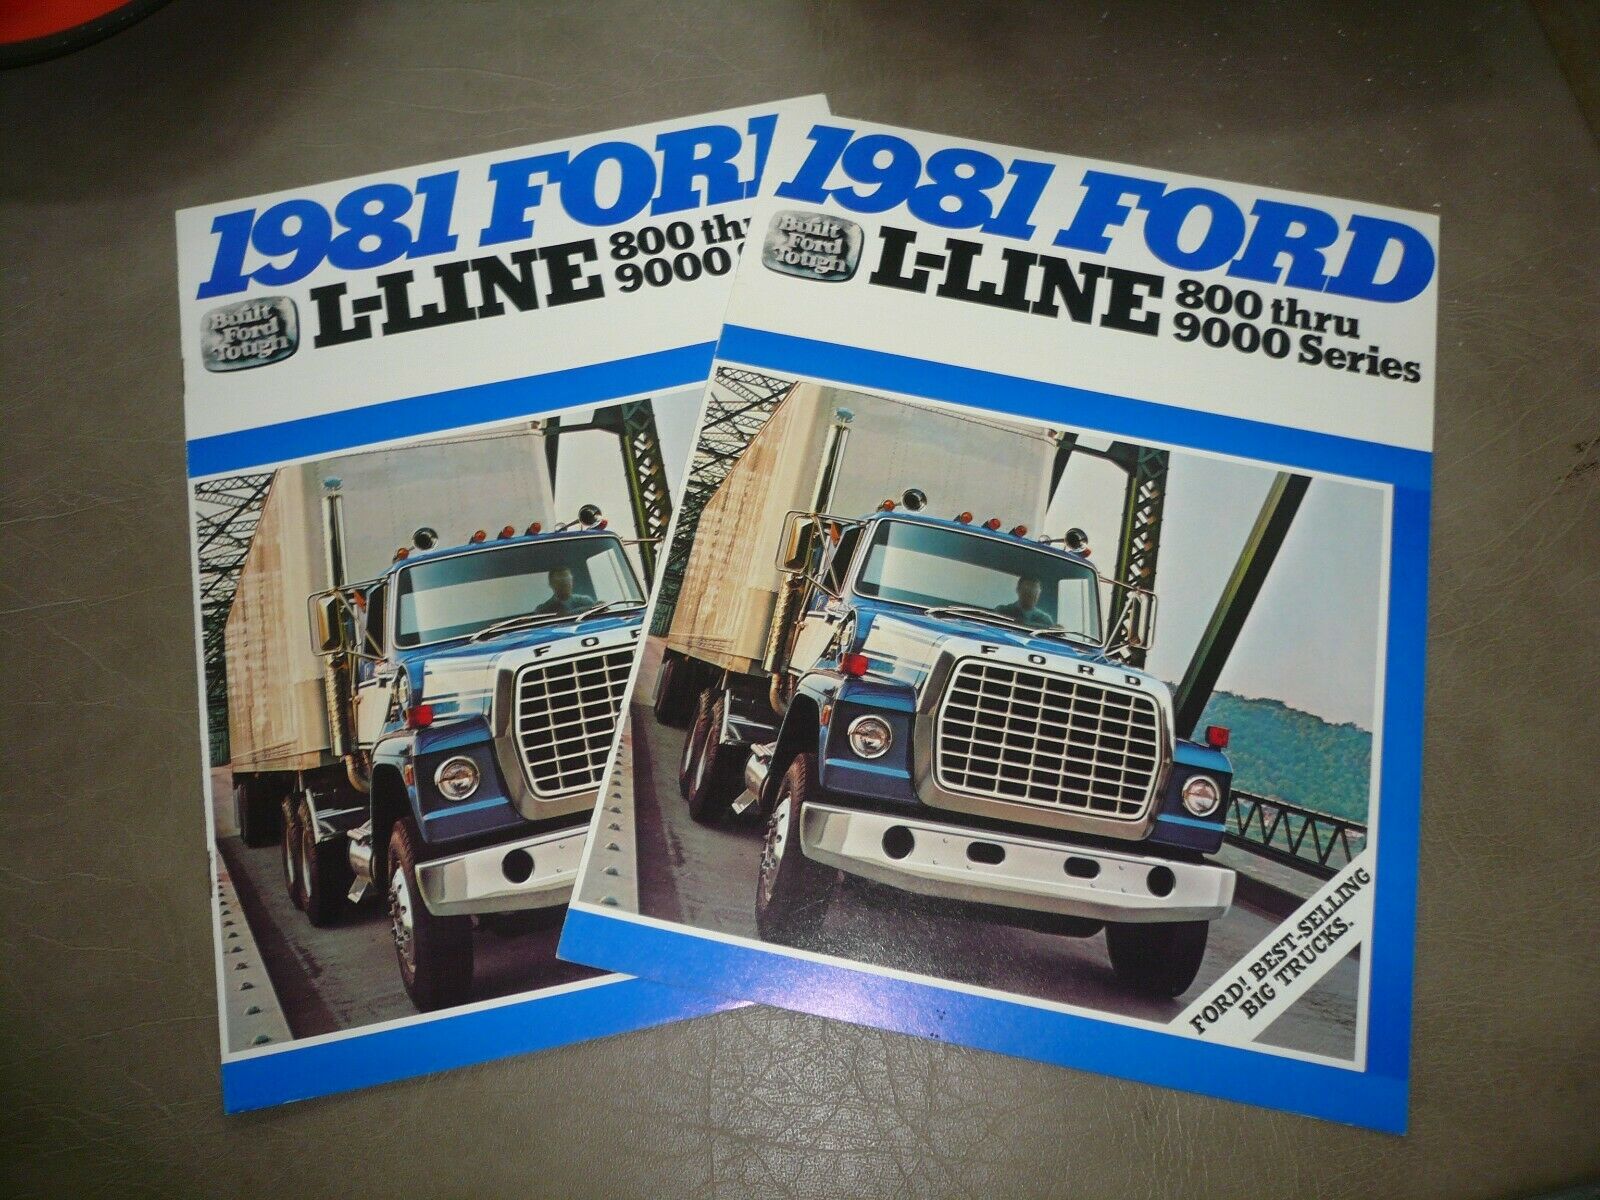 1981 Ford L-line 800 Thru 9000 Series Sales Brochure - Two For One Price